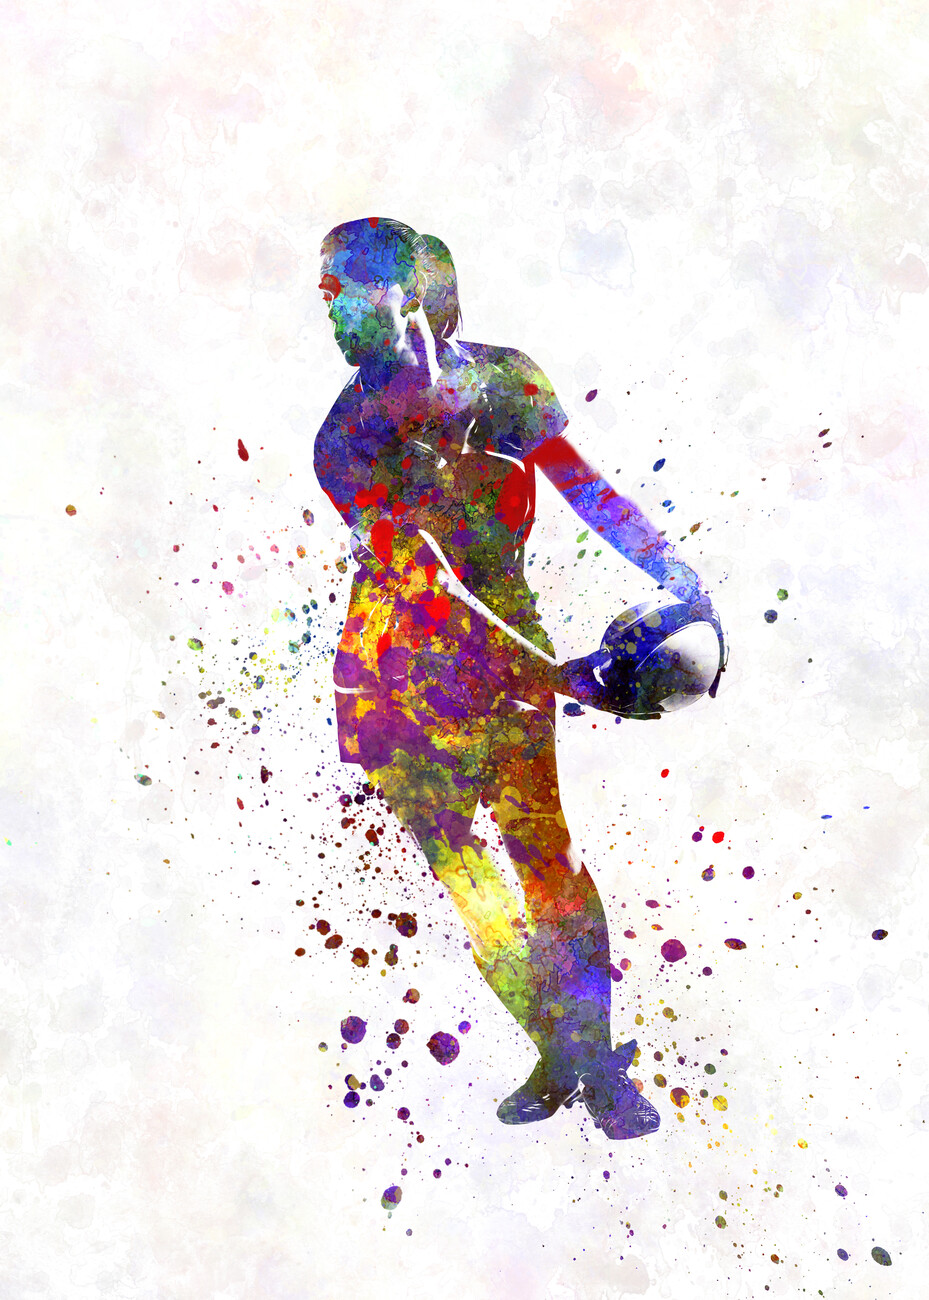 Watercolor rugby player Wall Mural Buy online at Europosters